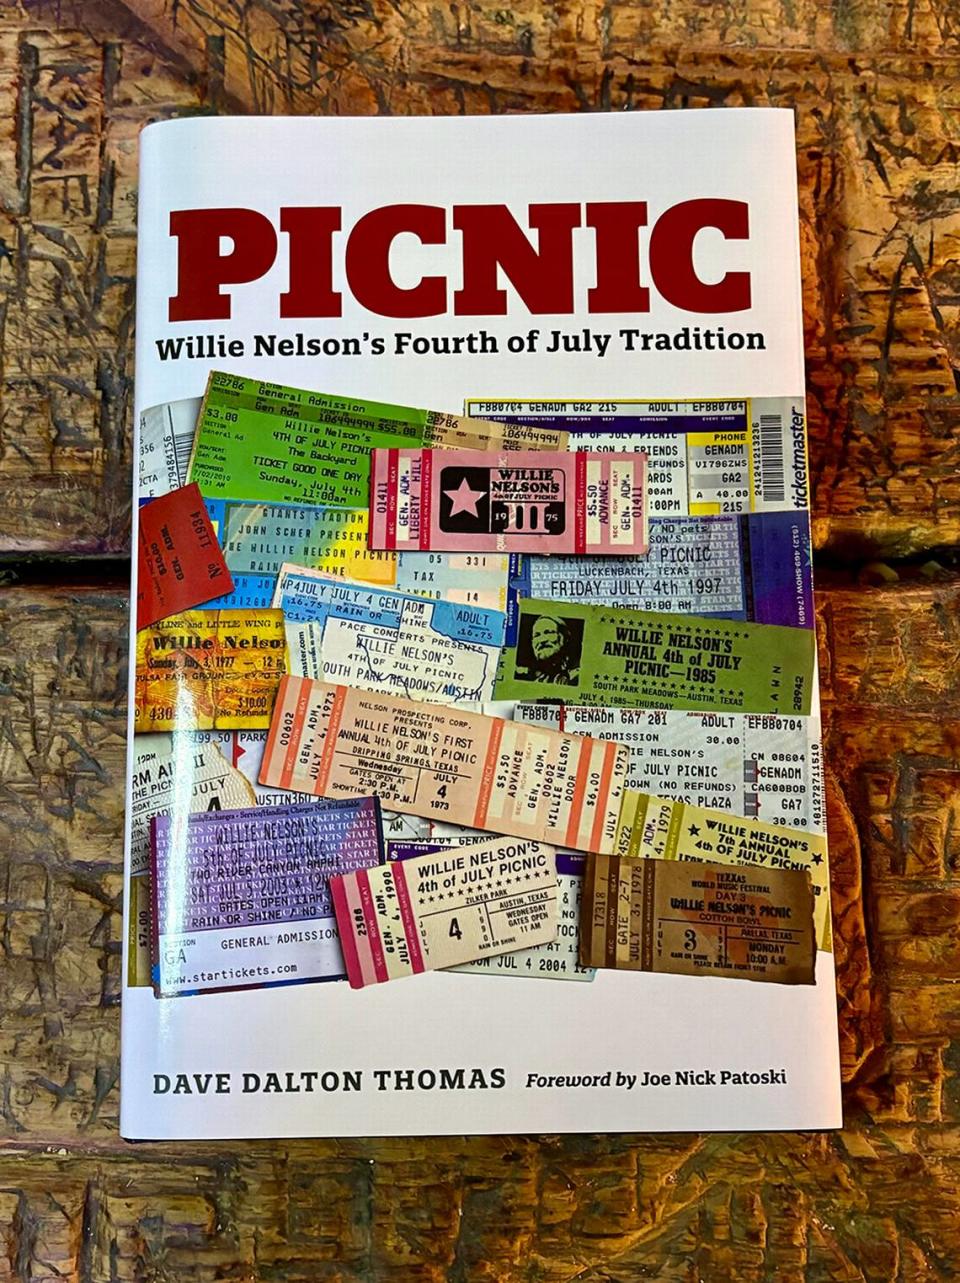 Dave Thomas’ new book “Picnic: Willie Nelson’s Fourth of July Tradition,” is available now. Courtesy of Dave Thomas